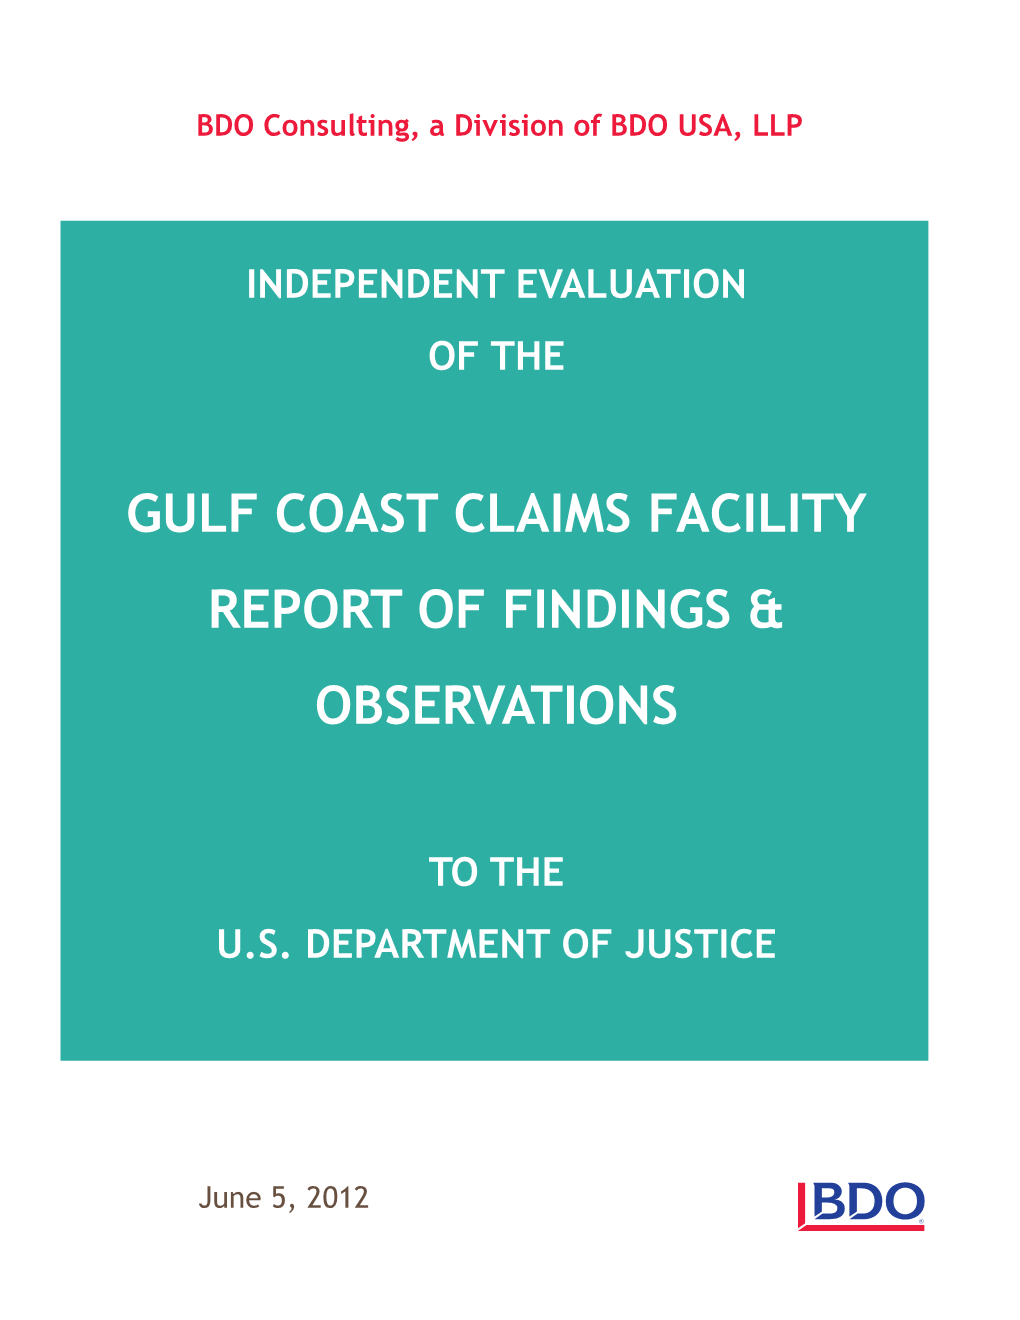 Gulf Coast Claims Facility Report of Finding & Observations